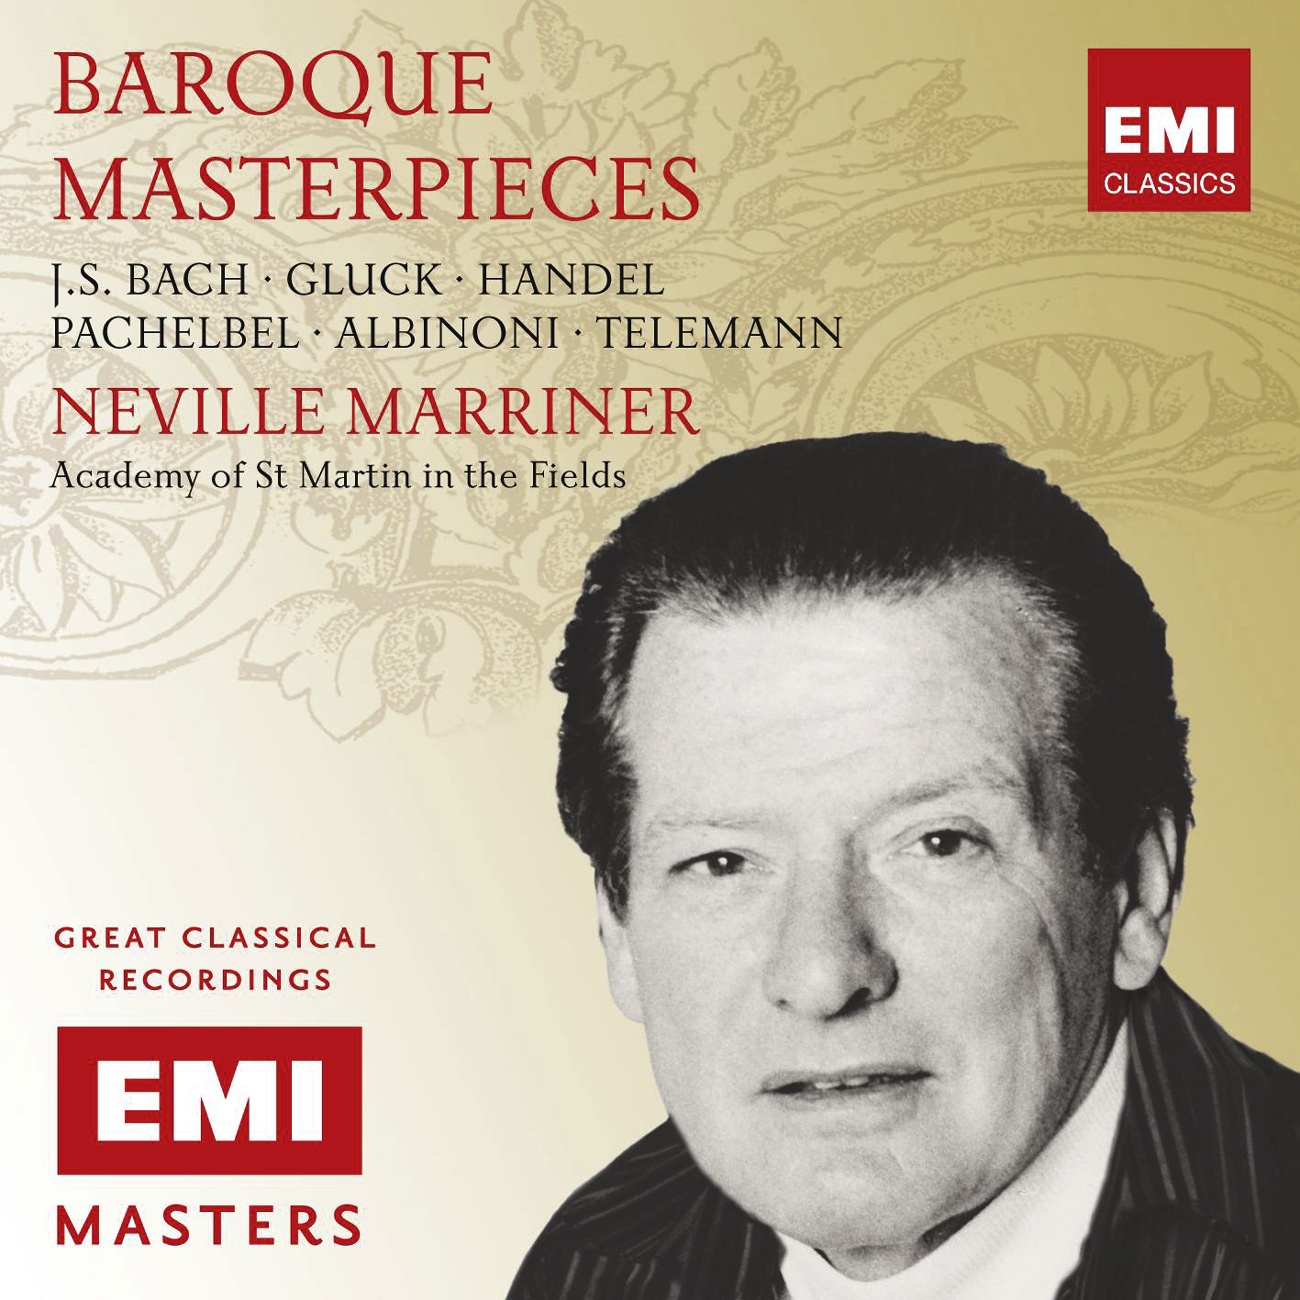 4 Orchestral Suites, BWV 10669, Suite No. 3 in D Major, BWV 1068 2 oboes, 3 trumpets, strings and timpani: Bourre e